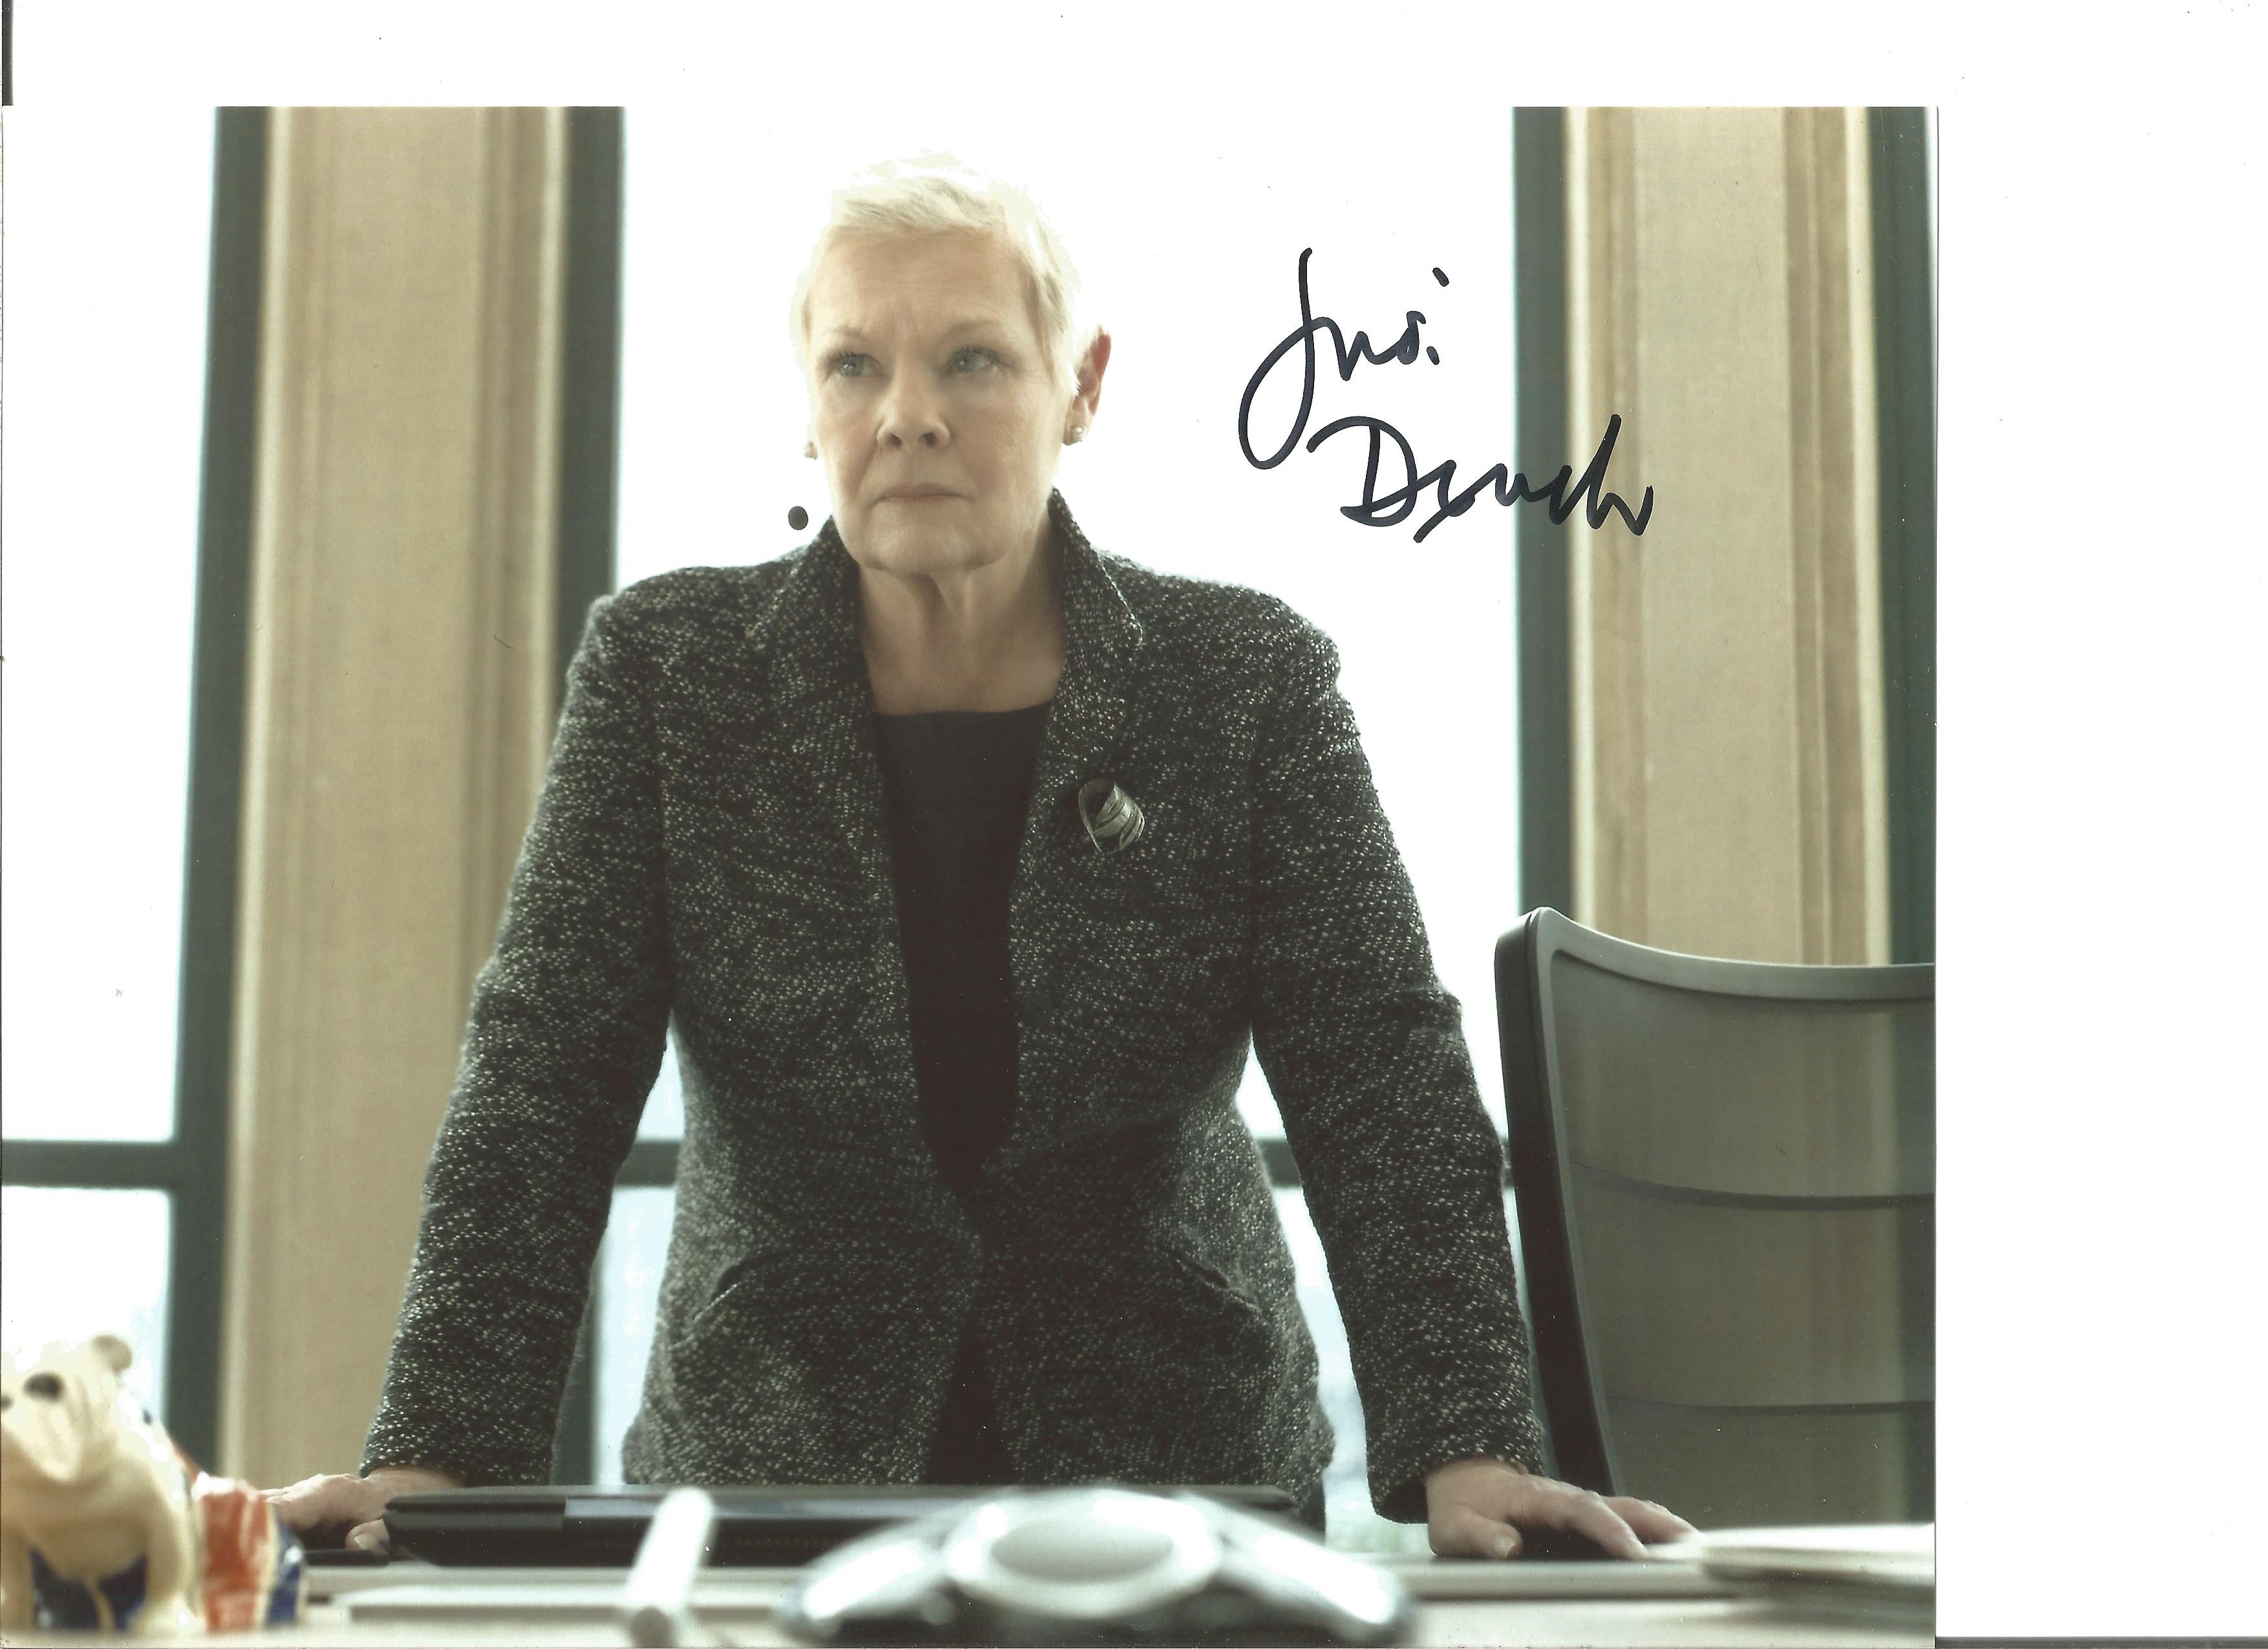 James Bond Judi Dench as M signed 10 x 8 inch colour photo standing behind her desk. Good Condition.